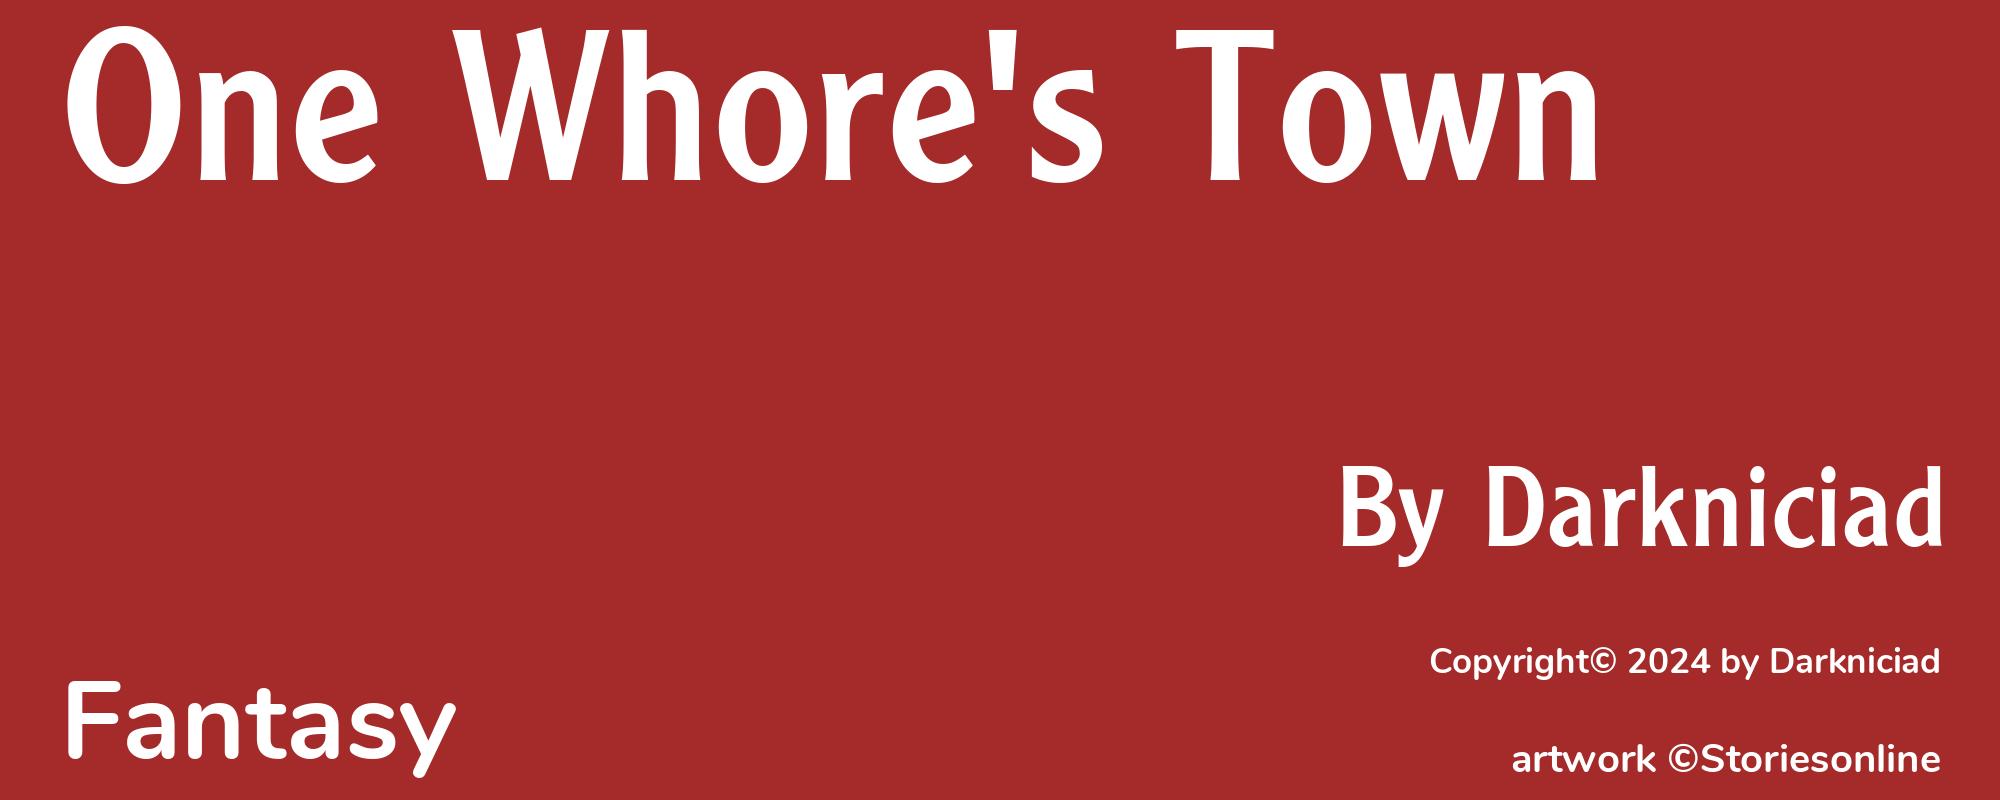 One Whore's Town - Cover